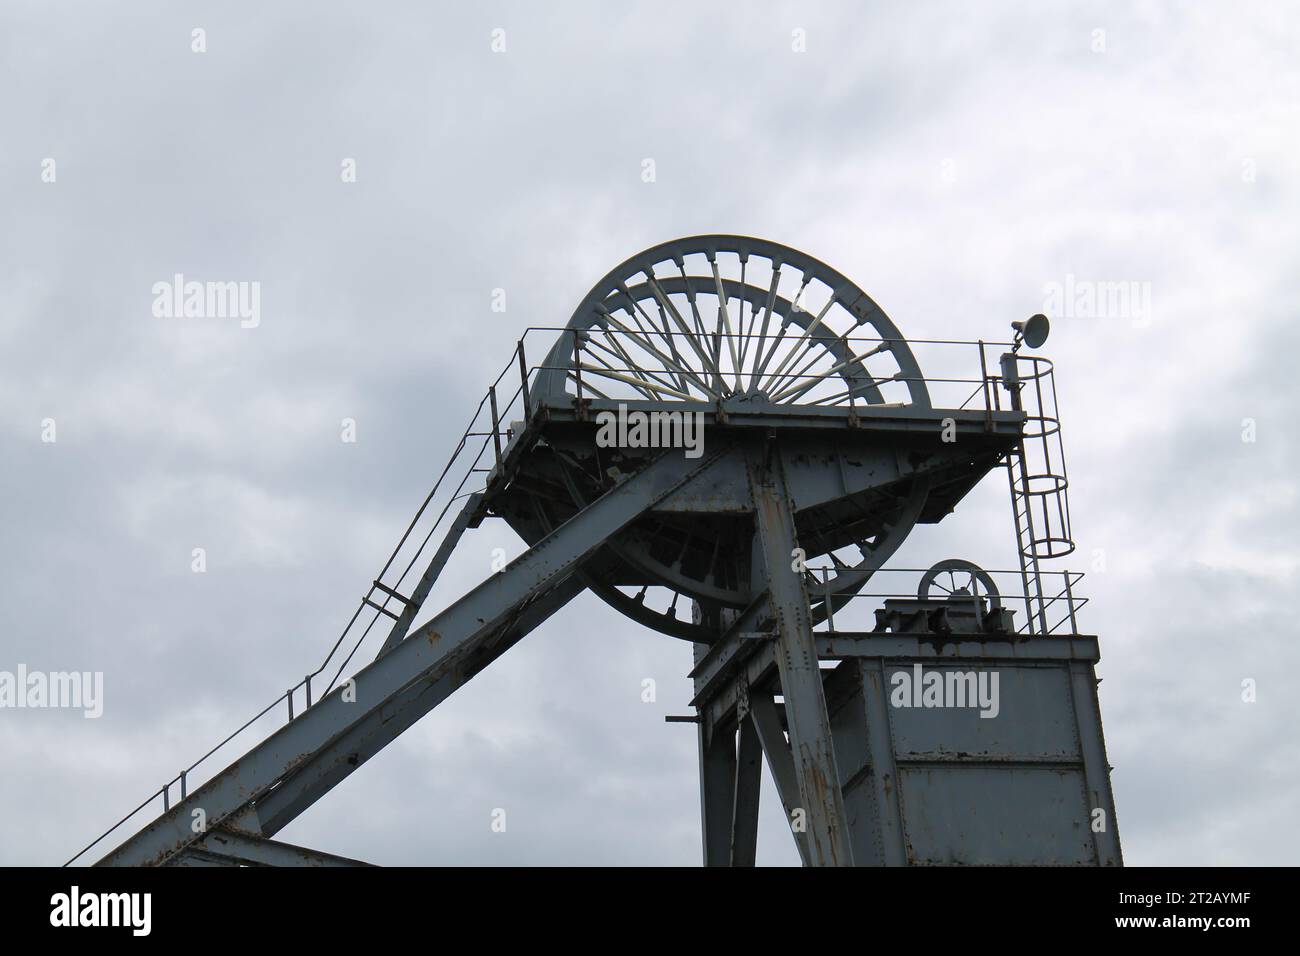 The Top of the Headstocks of a Disused Coal Mine. Stock Photo